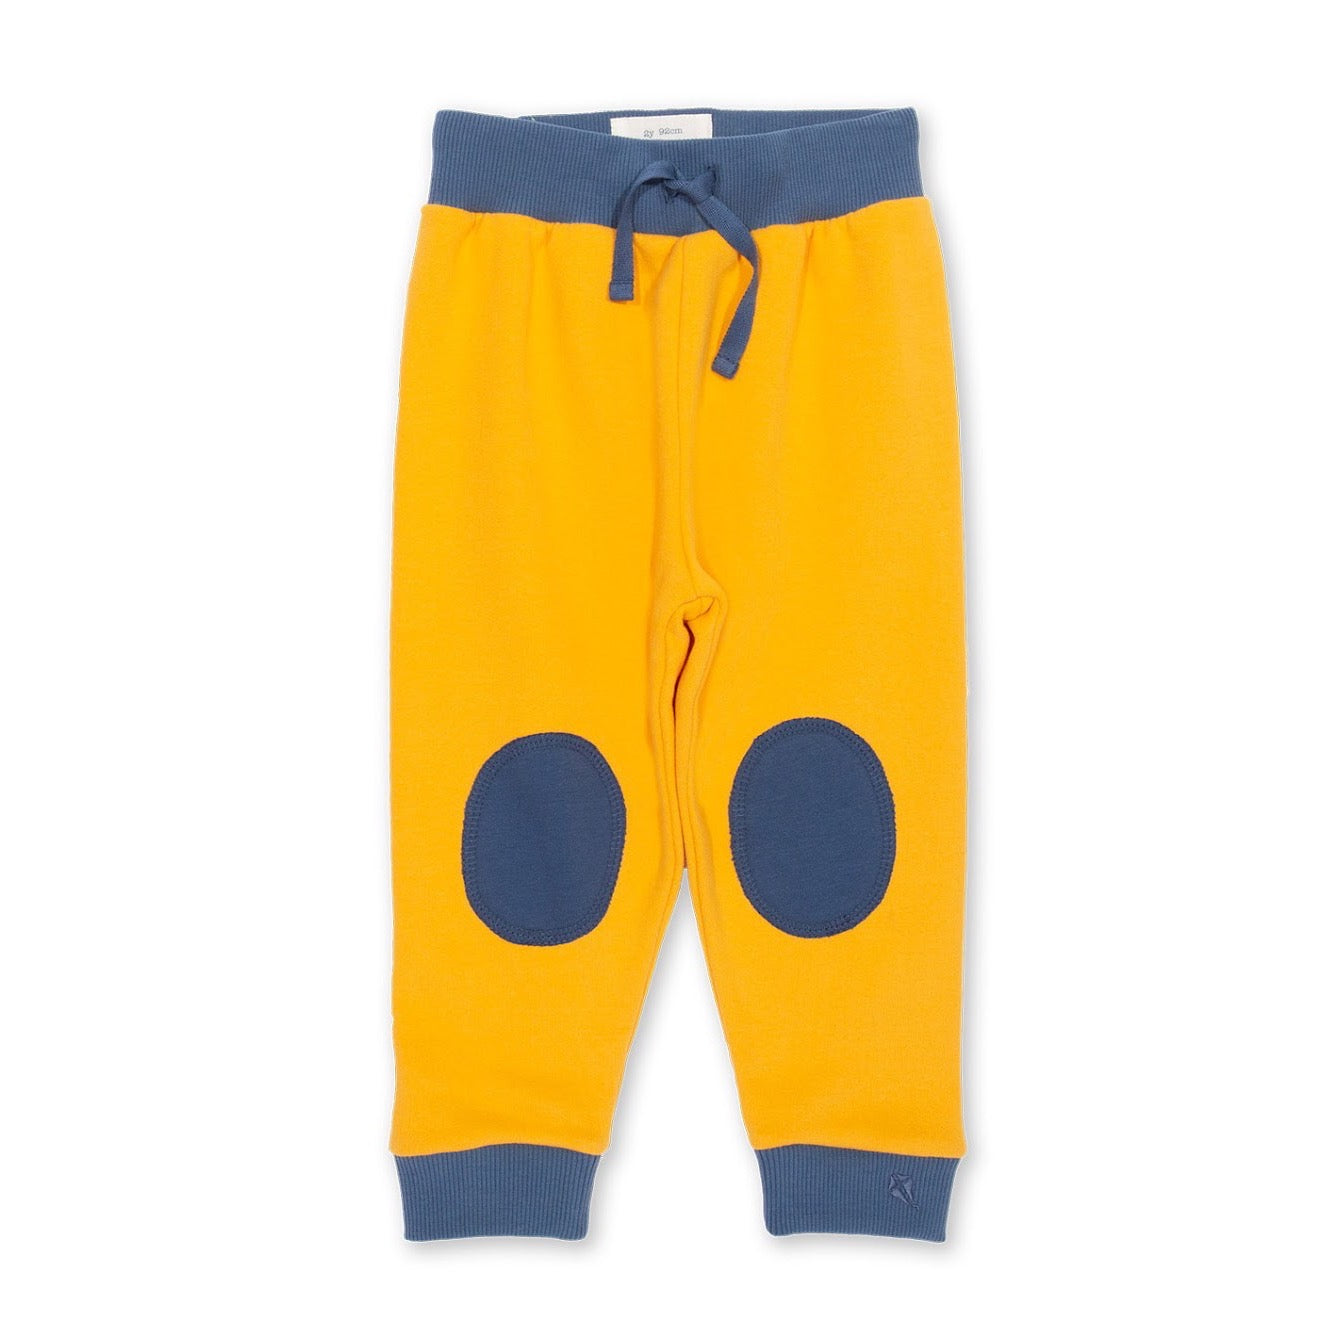 Kite Infant Kneepatch Joggers 9097 Clothing 6-9M / Yellow,9-12M / Yellow,12-18M / Yellow,18-24M/2Y / Yellow,3YRS / Yellow,4YRS / Yellow